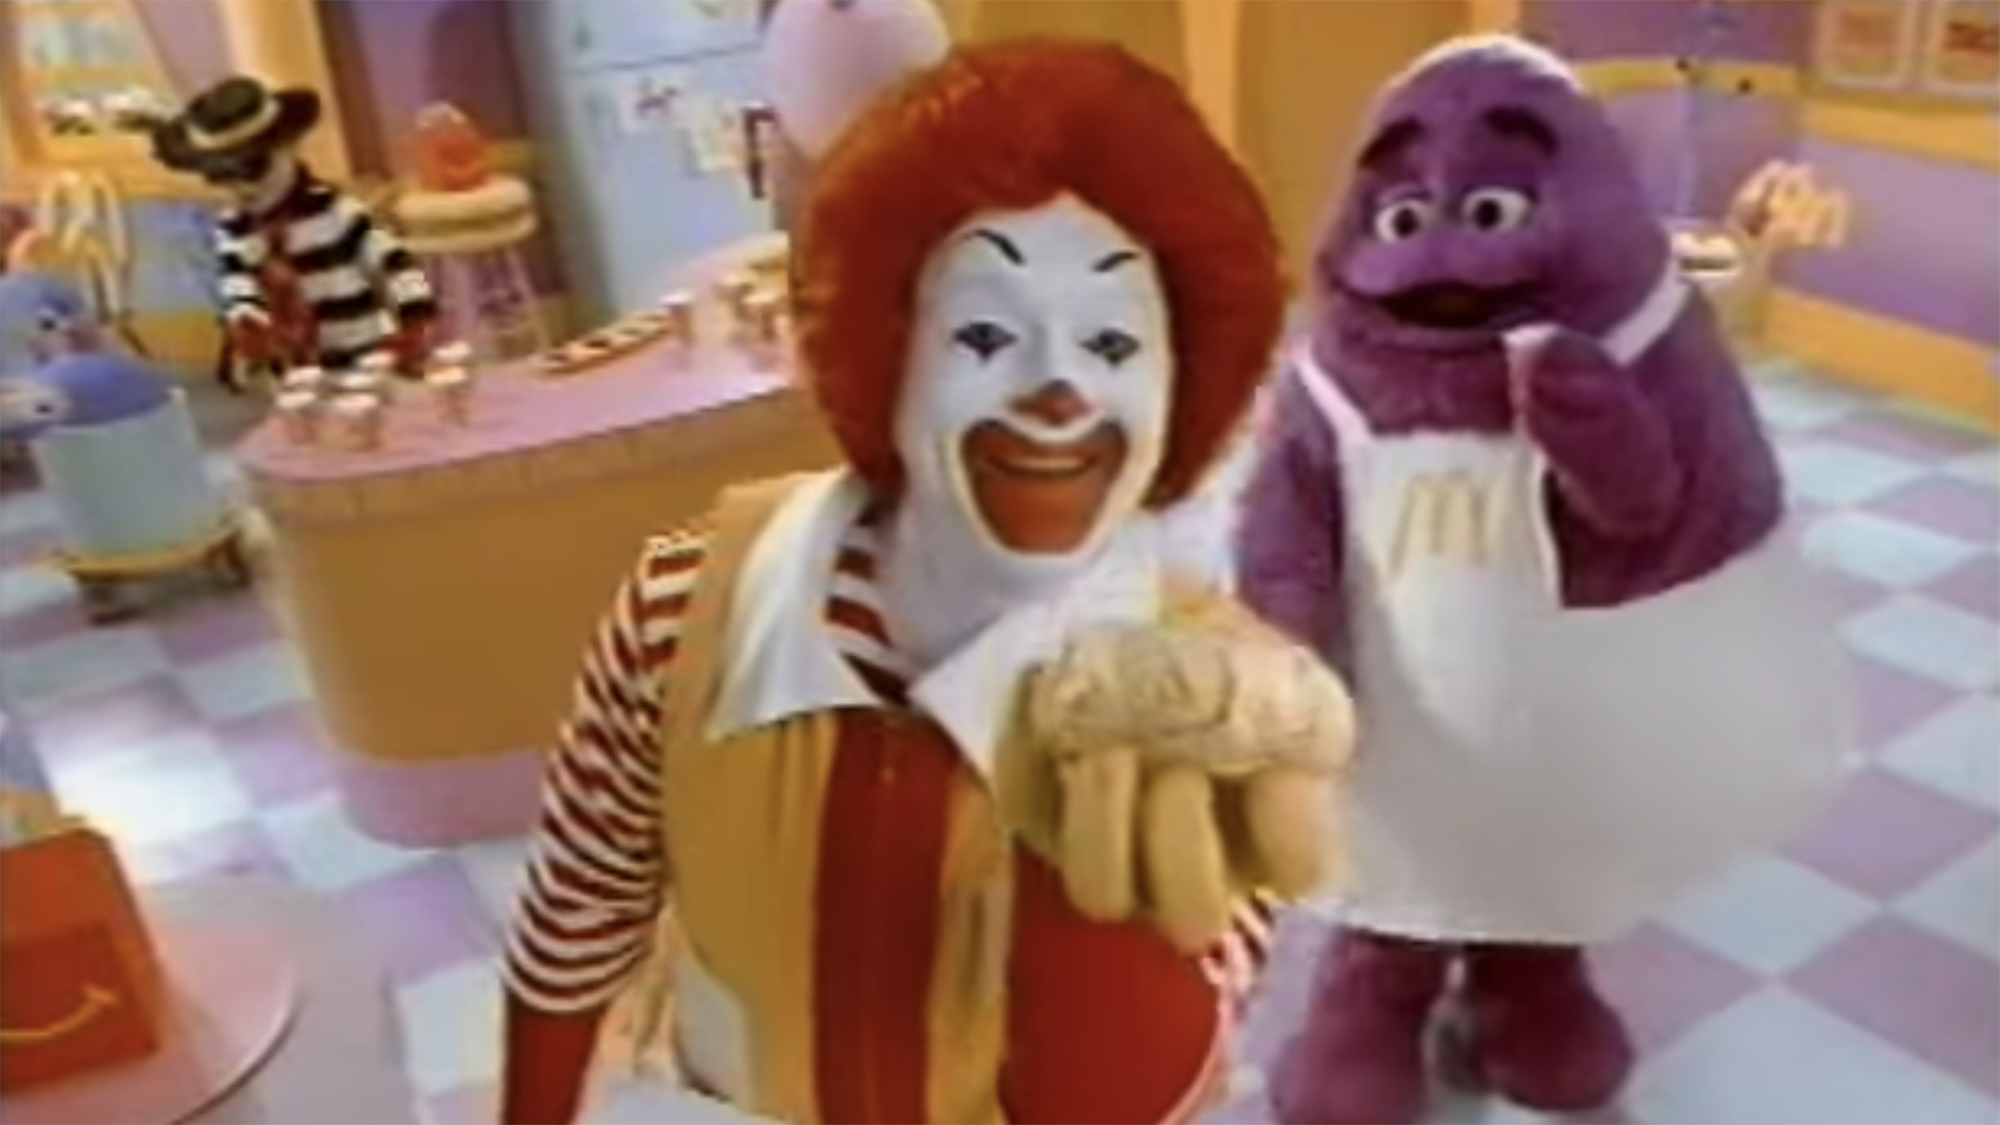 Fascinating The Ceo Of Mcdonald’s Has Revealed That Grimace Is The Larval Stage Of Ronald